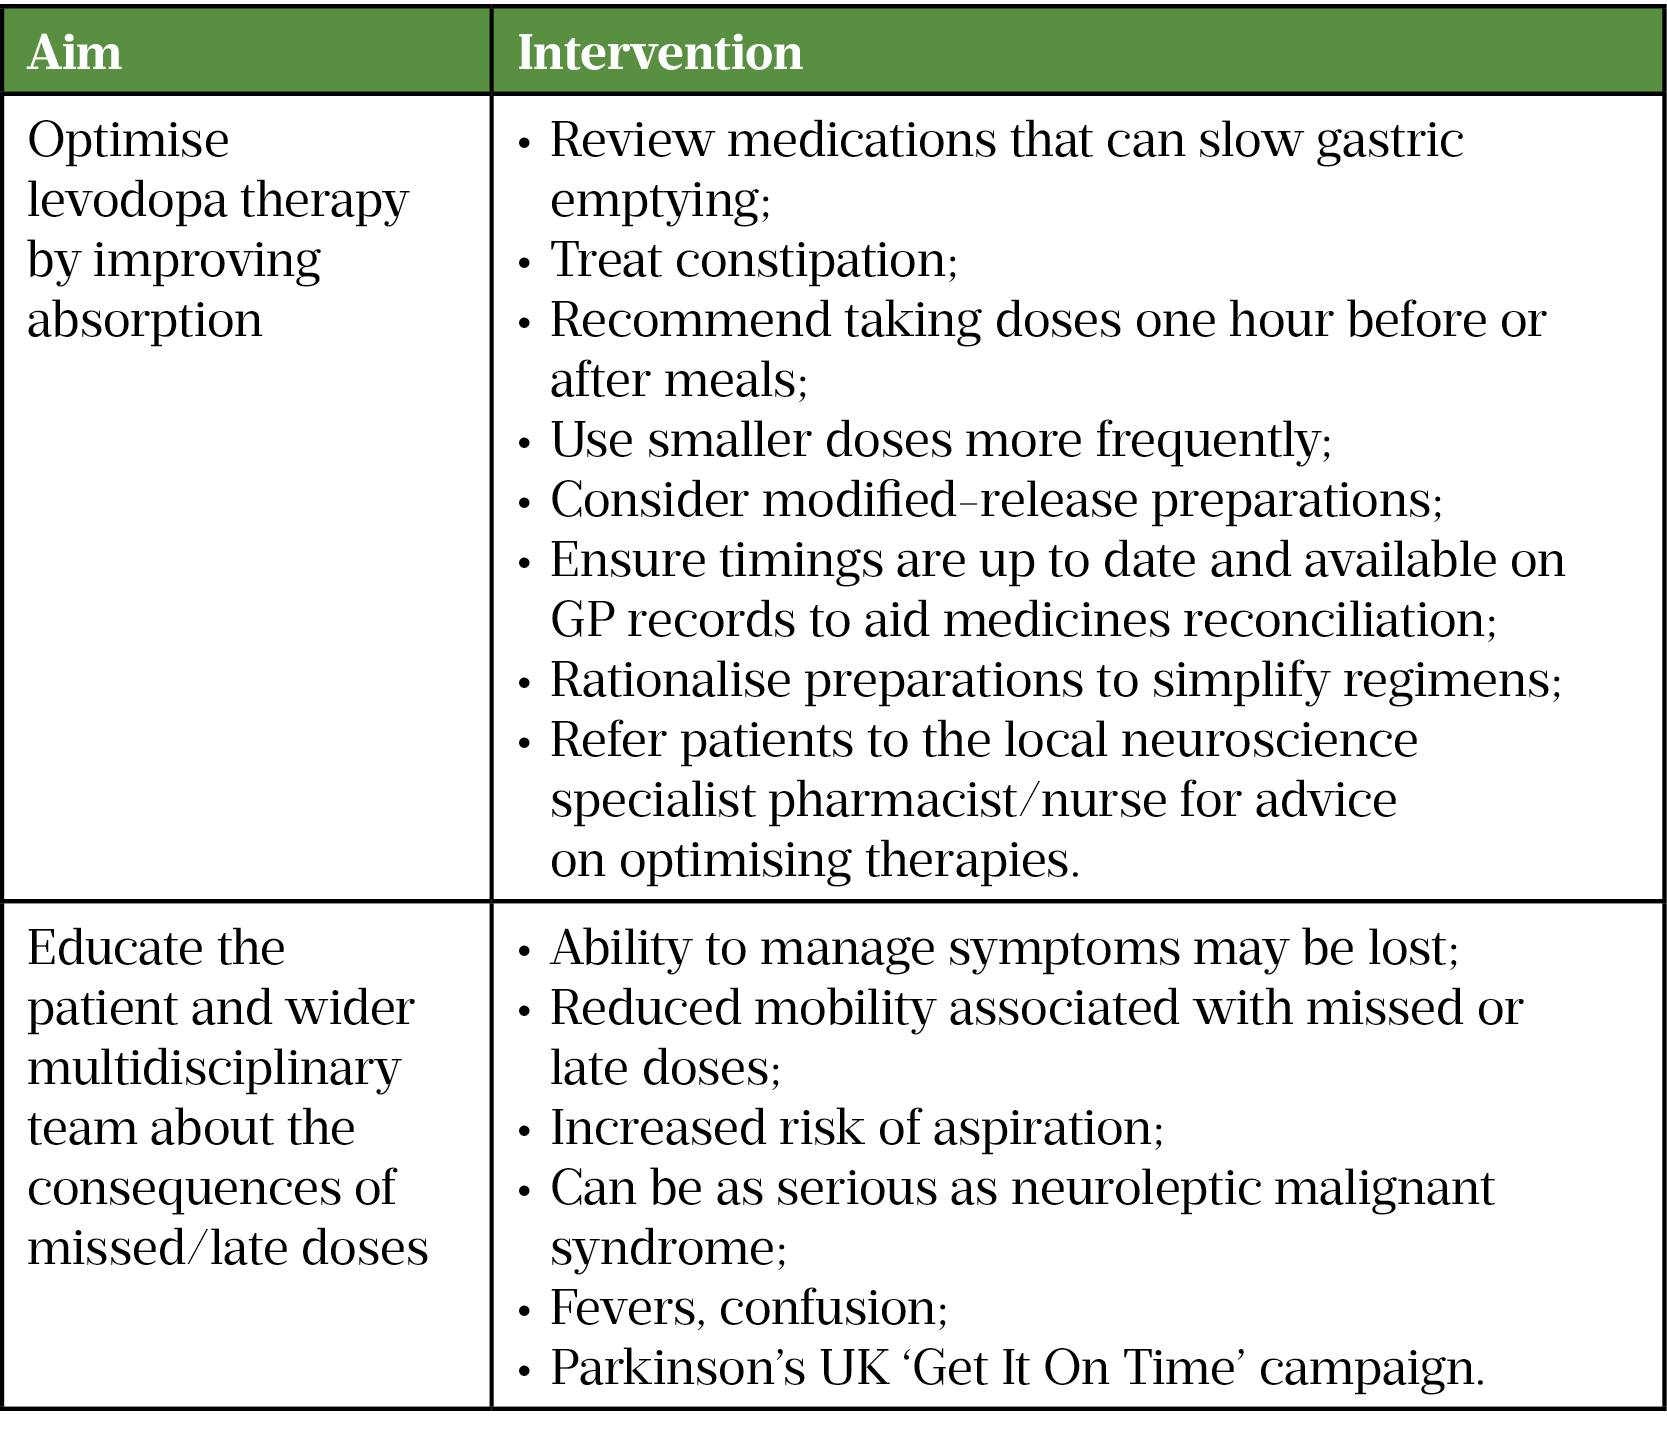 Table 4: Interventions pharmacists may consider